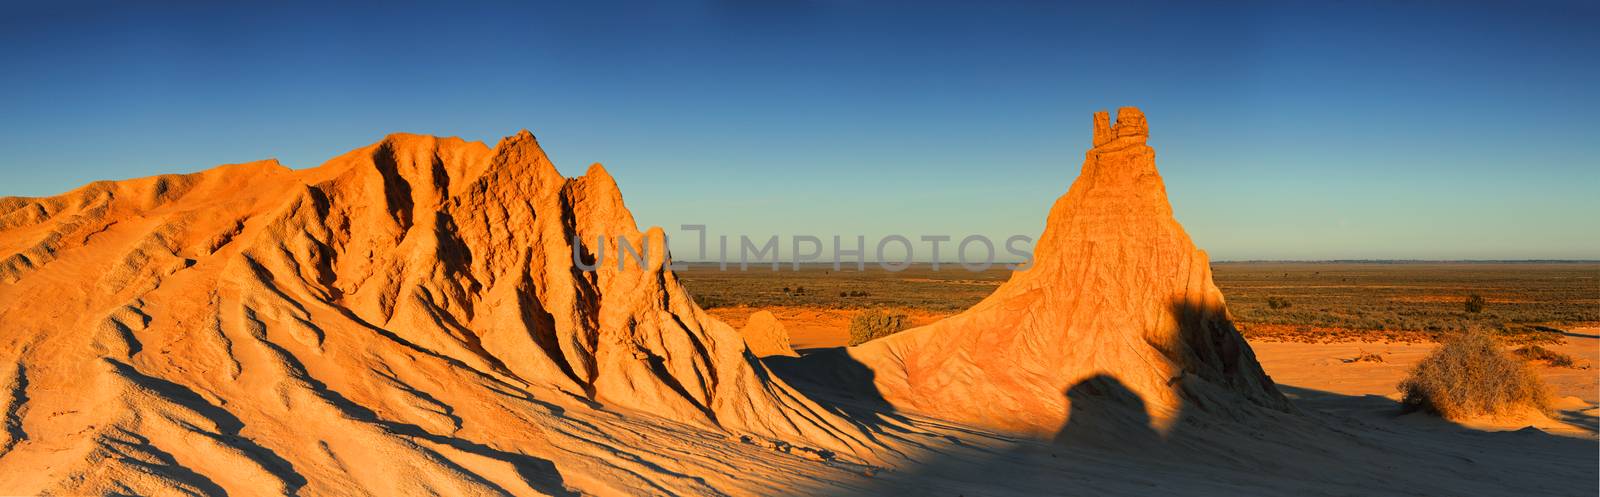 Inland Australia desert landscape in late afternoon winter light. Three image stitched panorama
